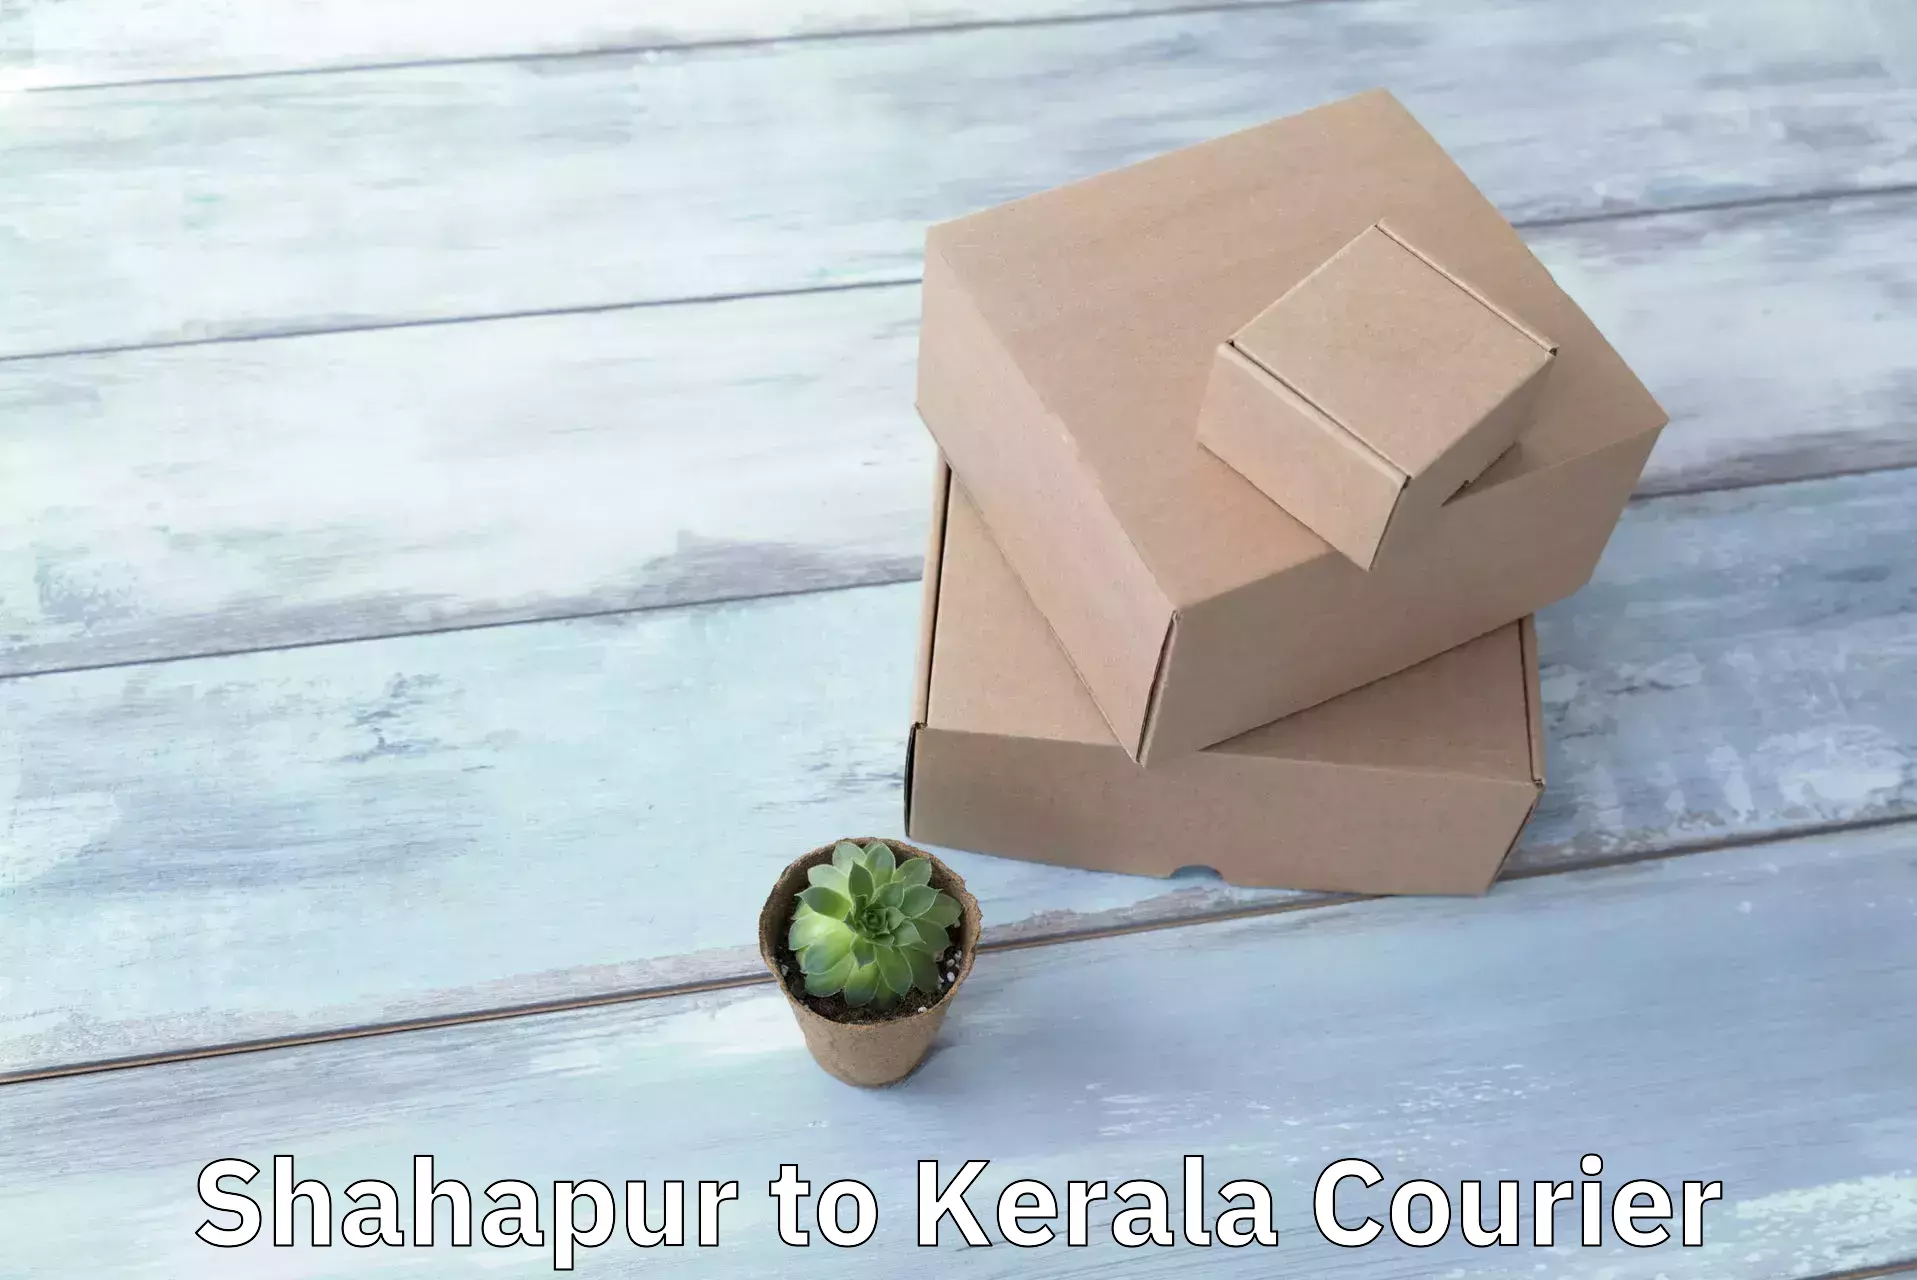 Cost-effective courier options Shahapur to Cochin Port Kochi